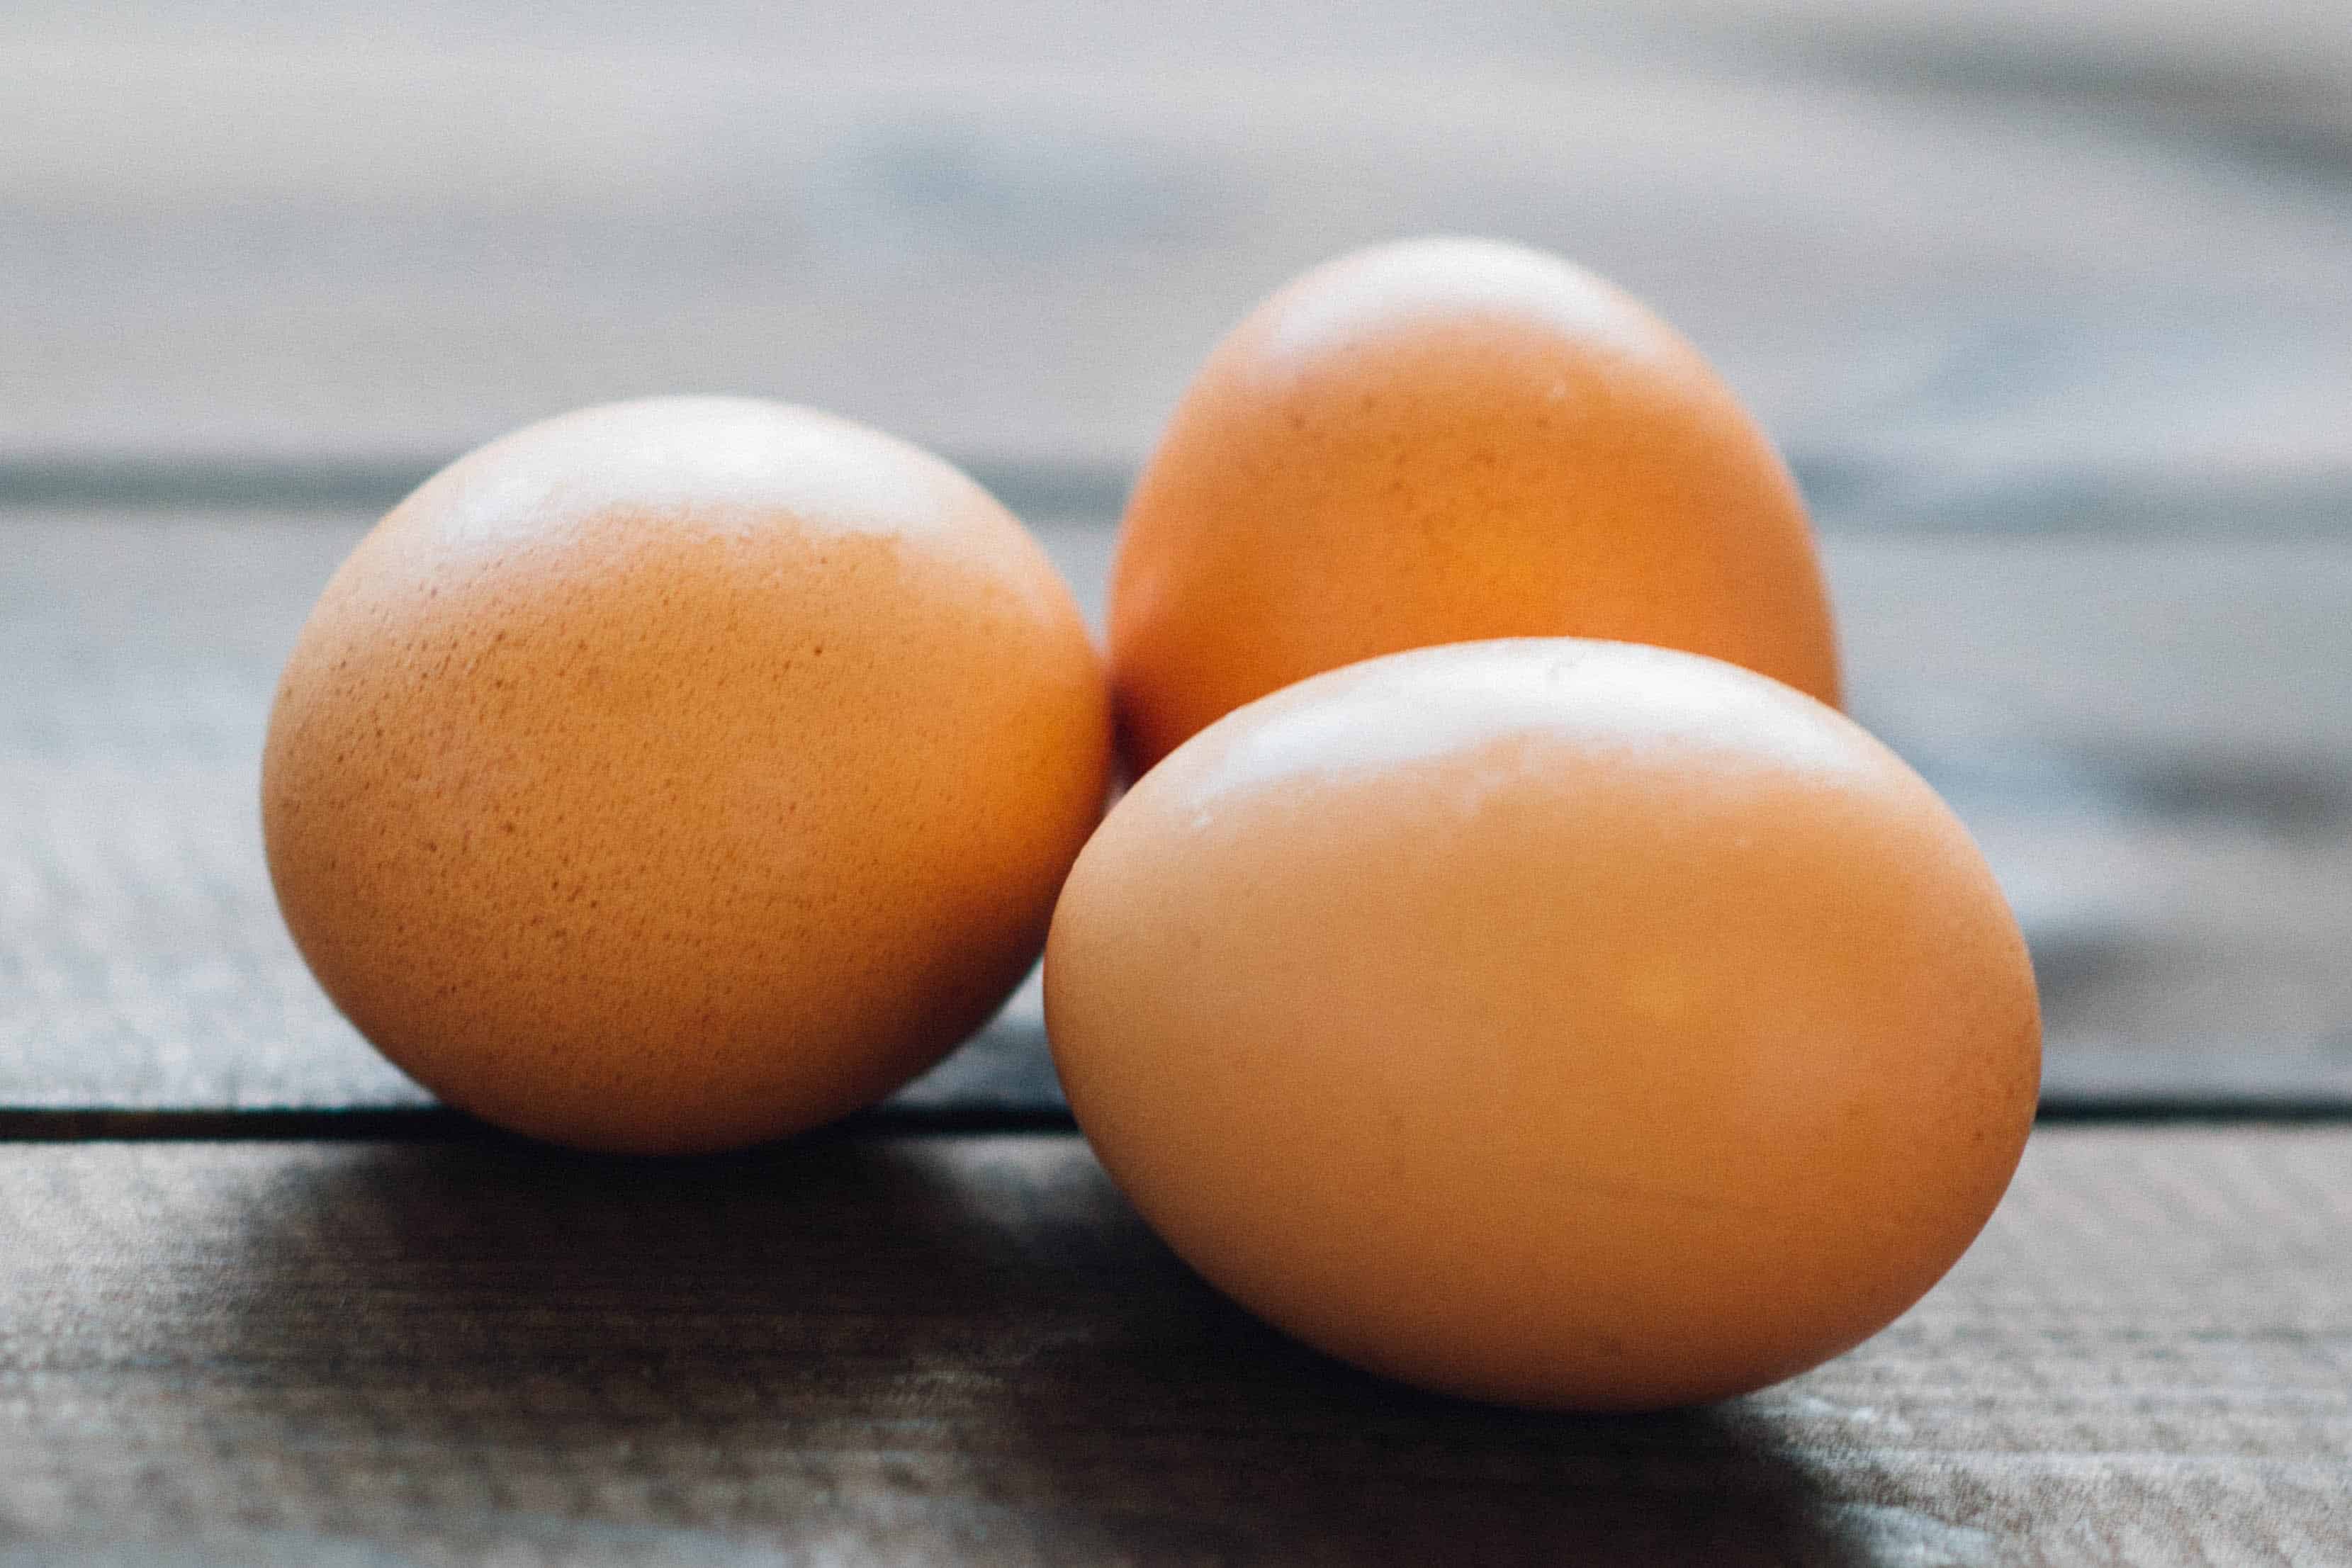 Eggs can be a great value on the carnivore diet, and is a complete source of protein